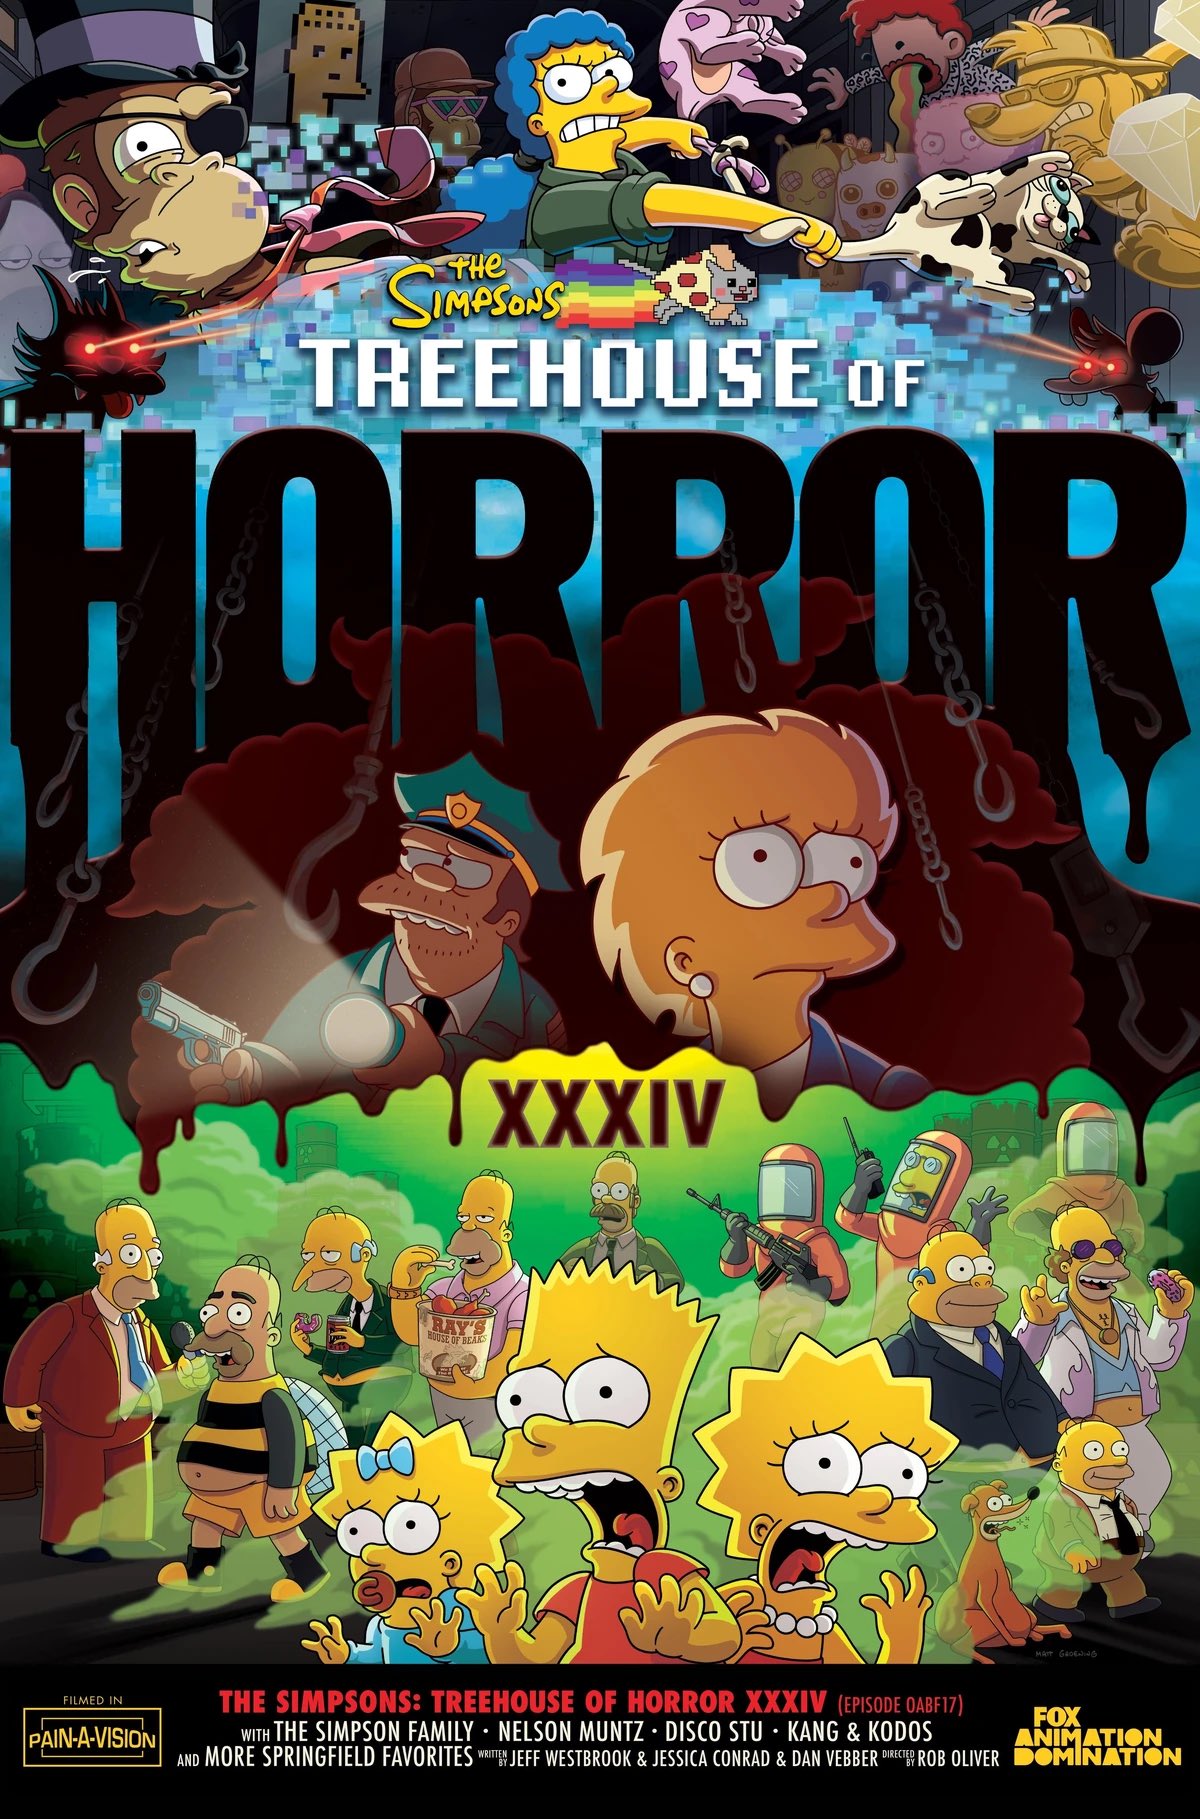 The Simpsons ‘Tree House of Horror’ Poster Features Some of Your Favorite NFTs!